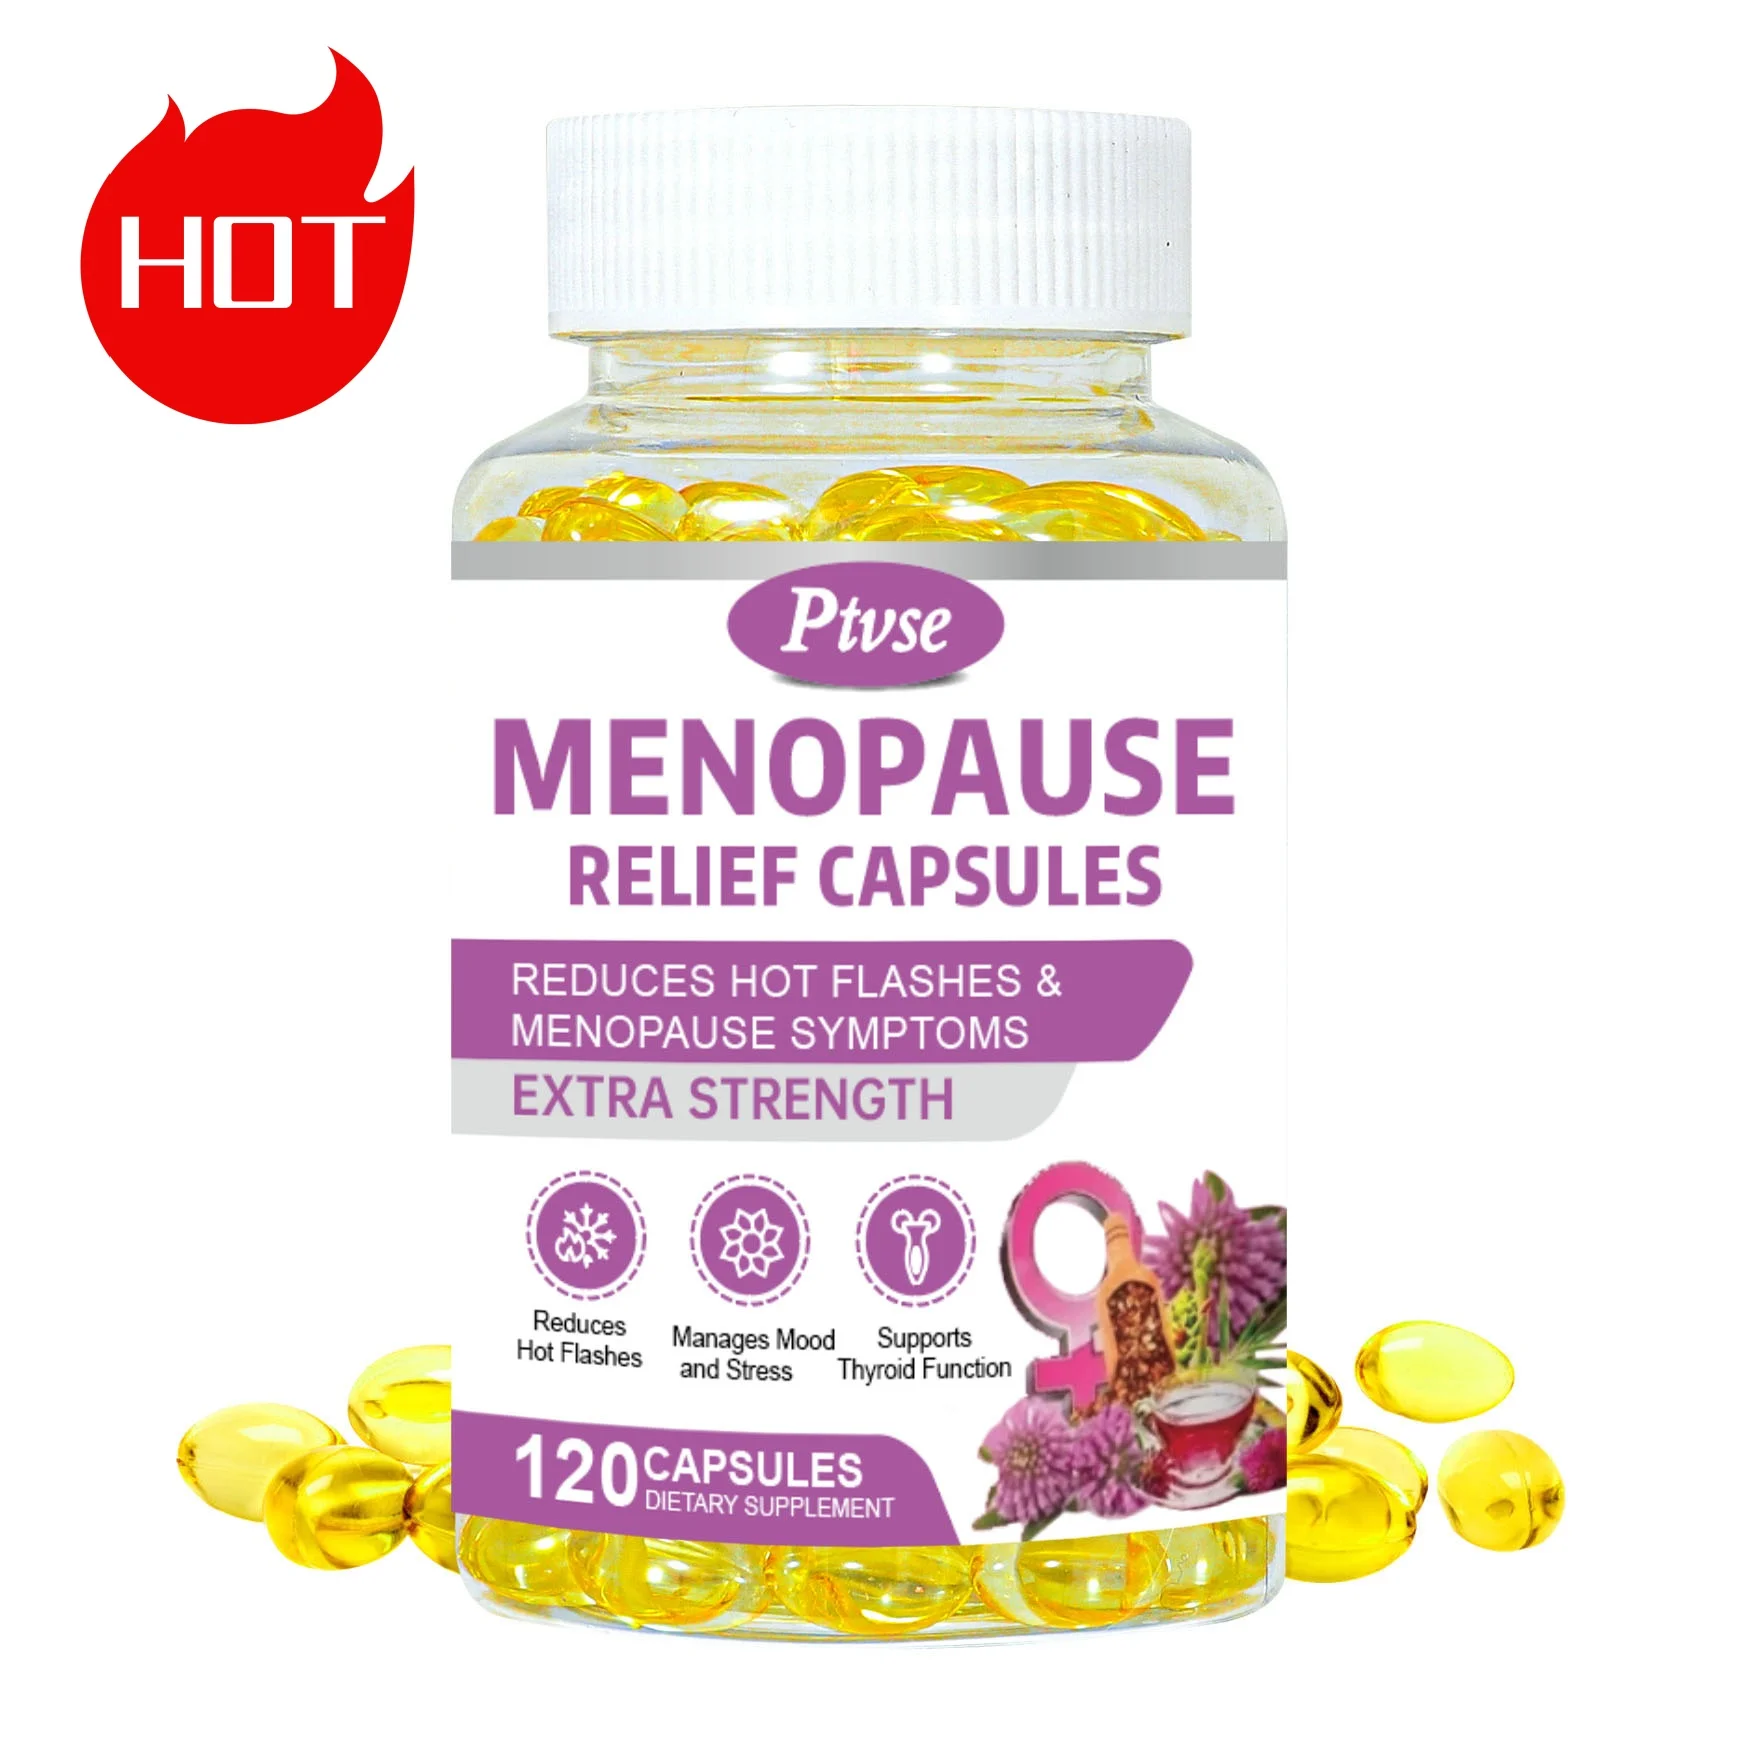 

Menopause Relief Capsule Multi-Symptom Relief for Hot Flashes & Night Sweats Support for Mood & Hormone Balance